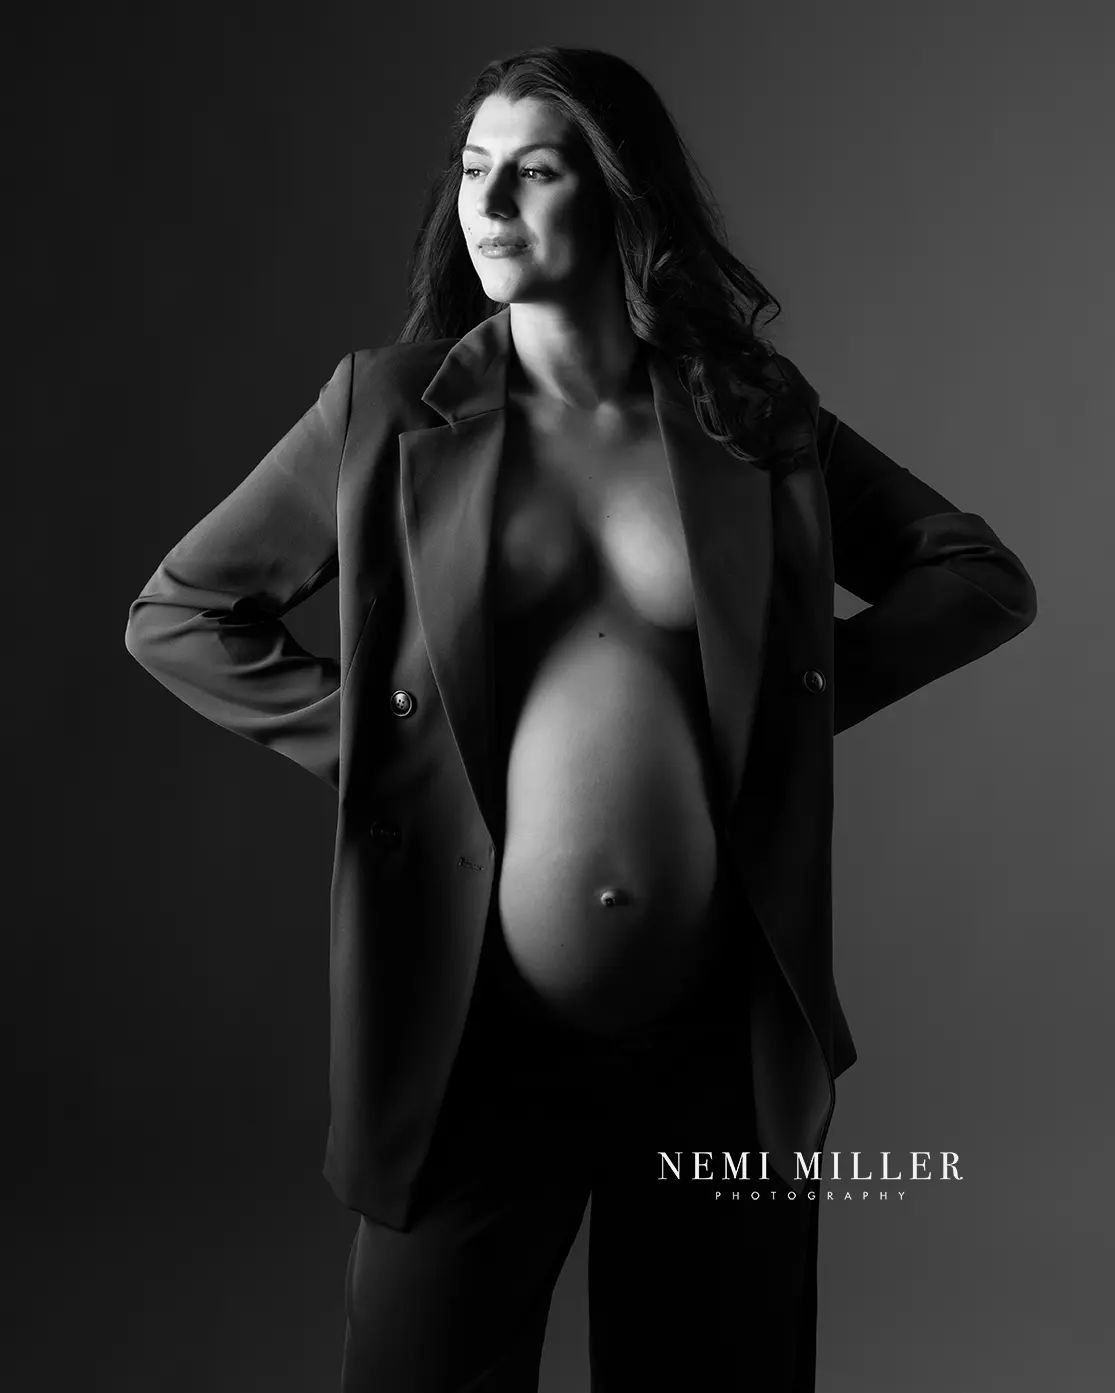 Suits look fab in maternity photoshoots so please bring one if you got one. White looks just as lovely as a dark one. Then a we have to do is strike the pose and add some creative lighting. 

______________________________________

  www.nemimiller.c